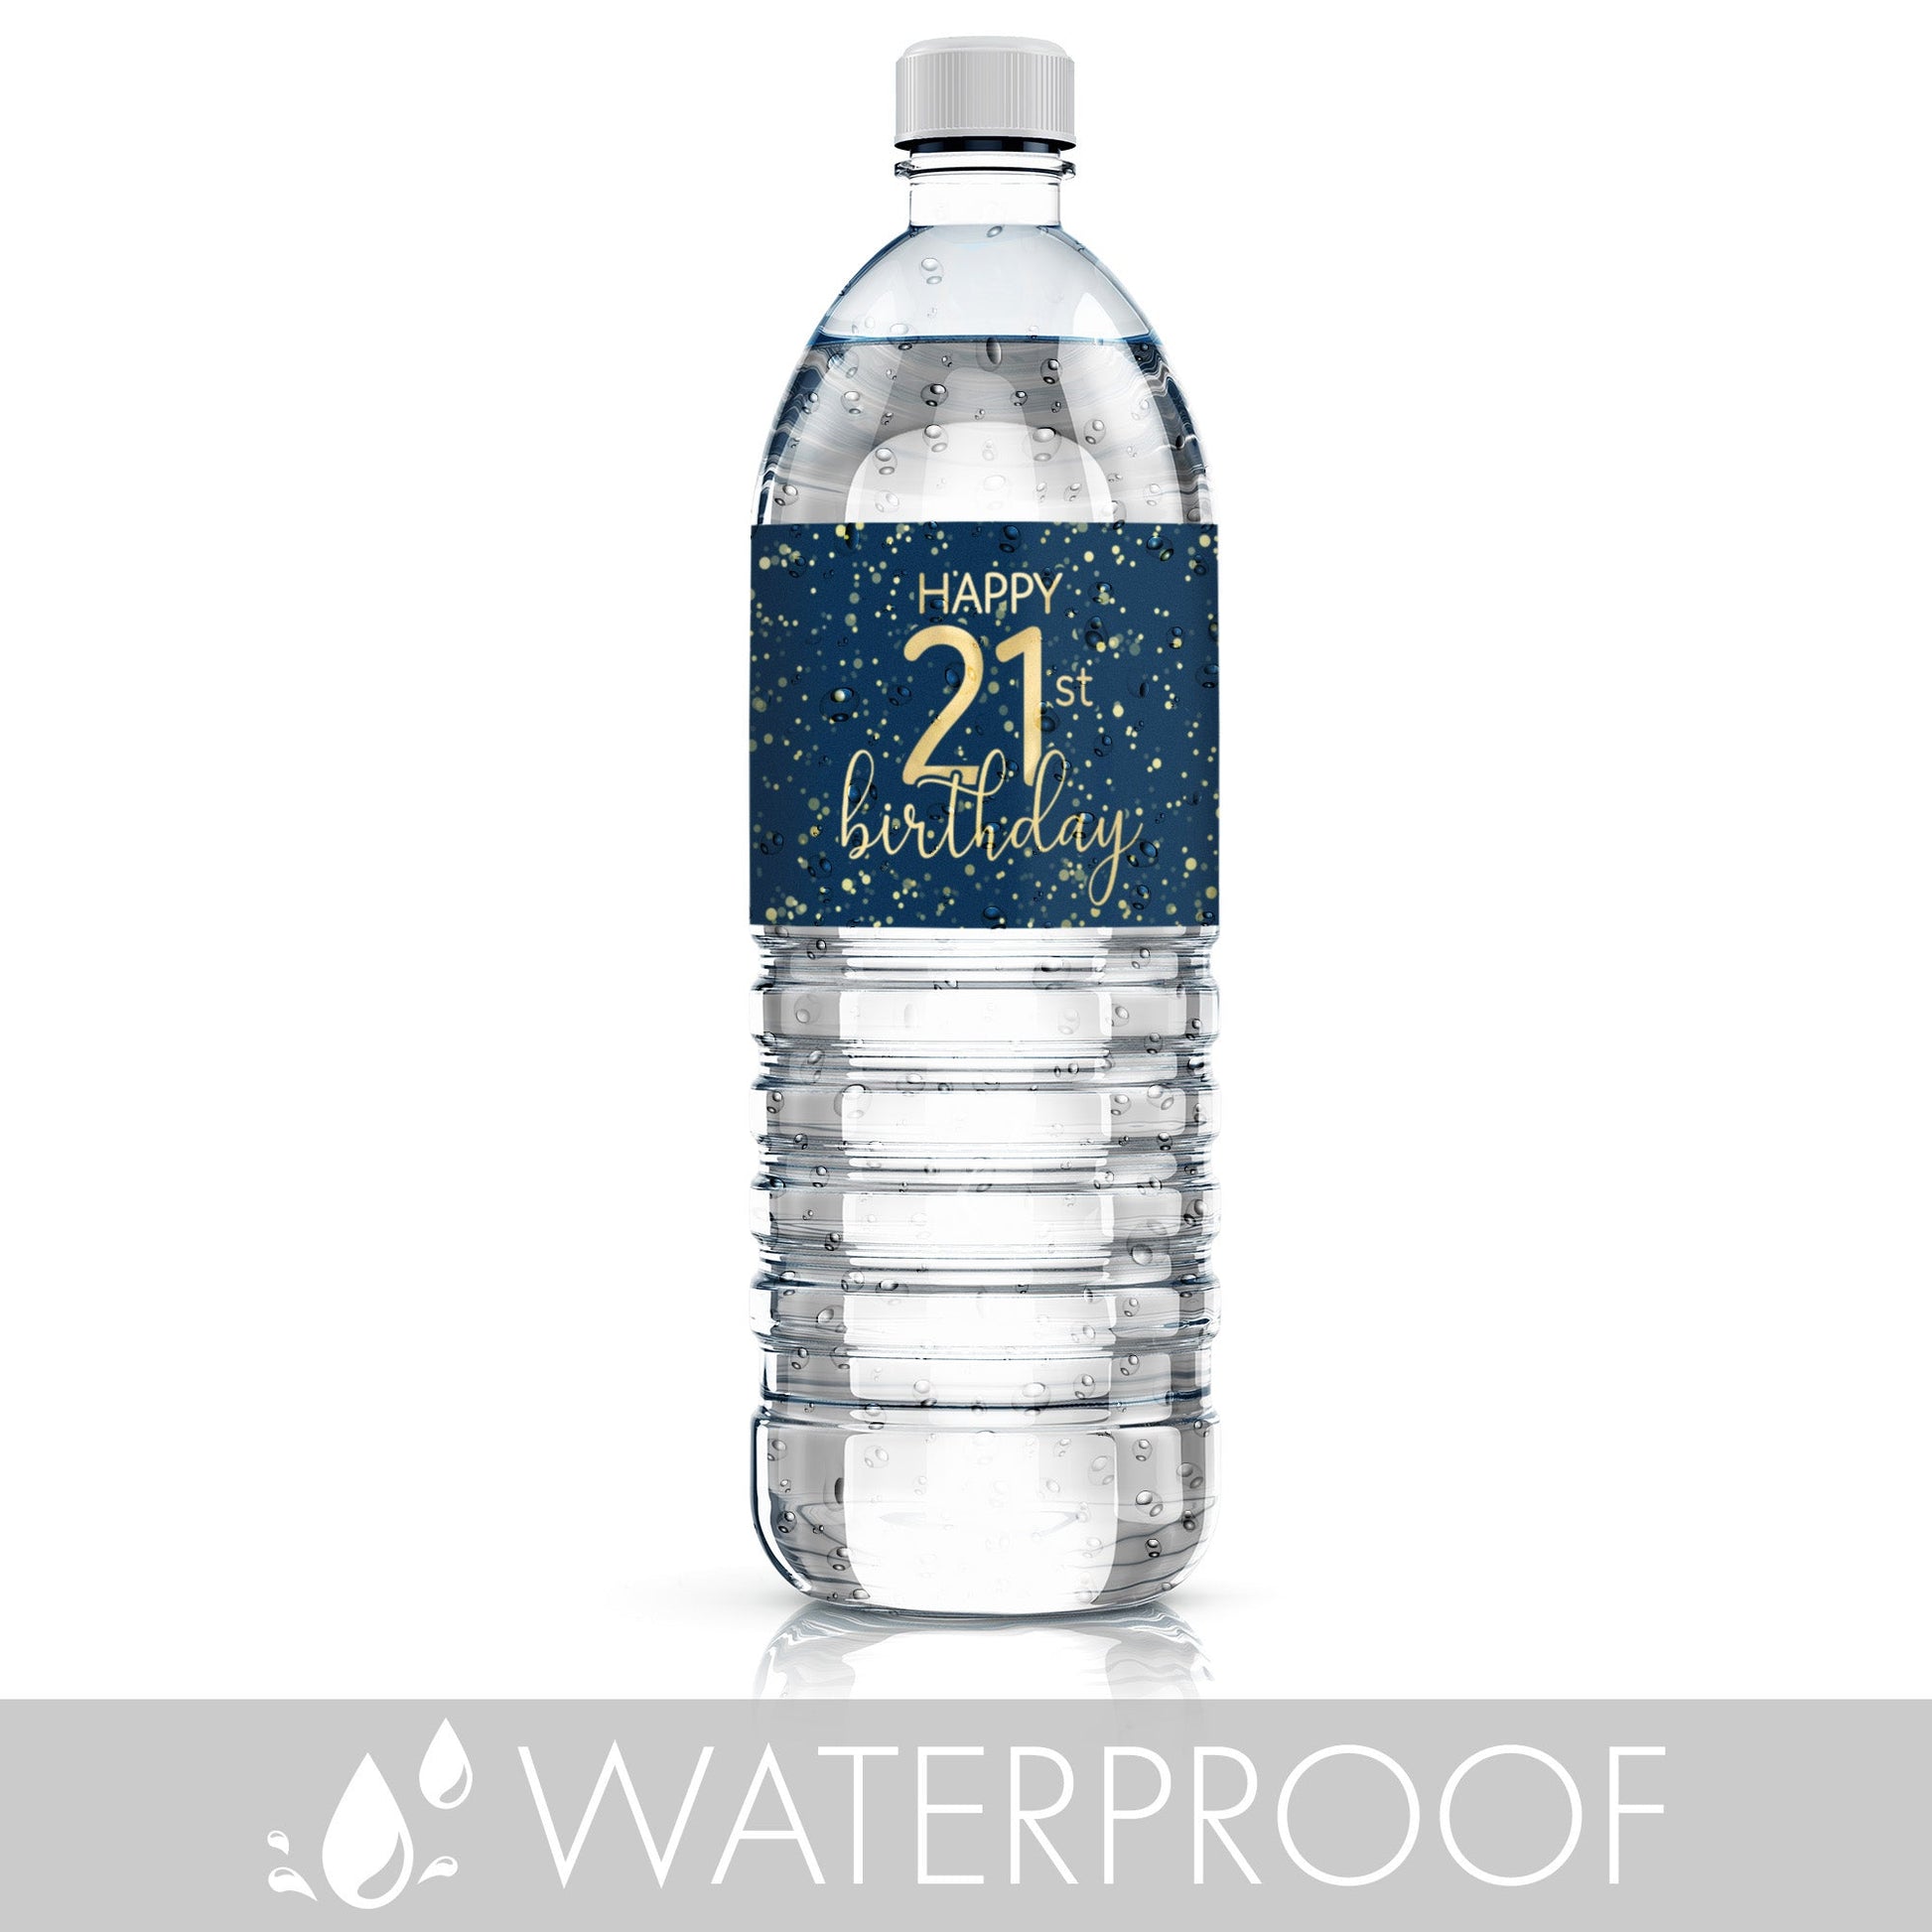 A group of water bottles with elegant navy blue and gold labels that are customized for an 21st birthday celebration, perfect for adding a personalized touch to any party.